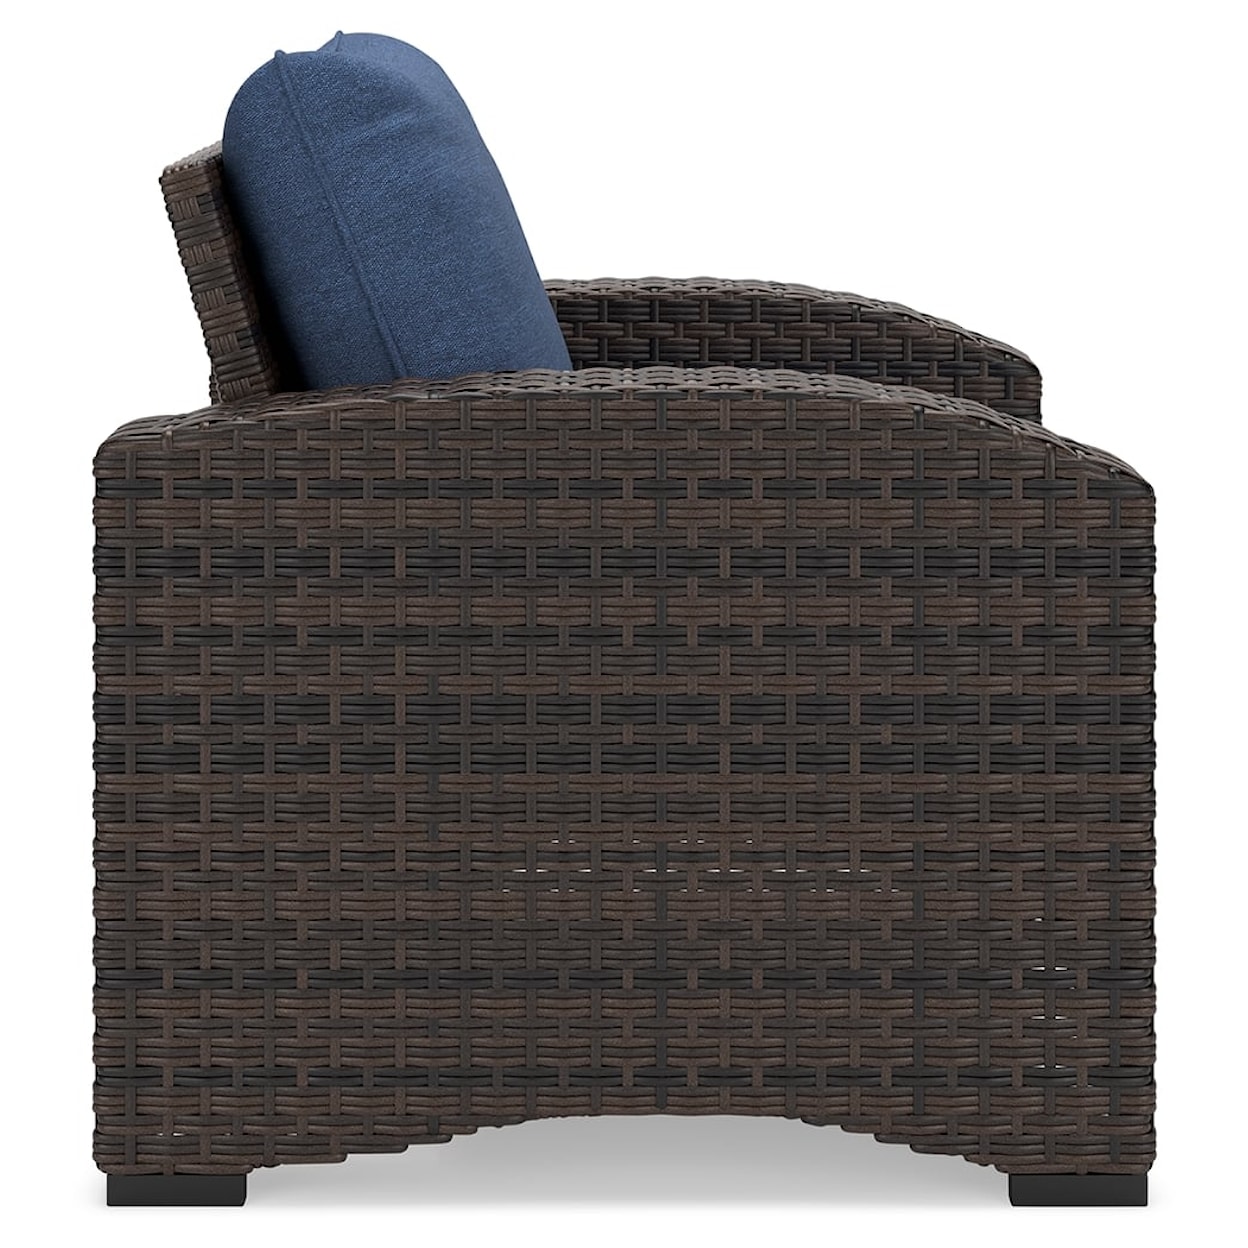 Signature Design Windglow Outdoor Lounge Chair with Cushion